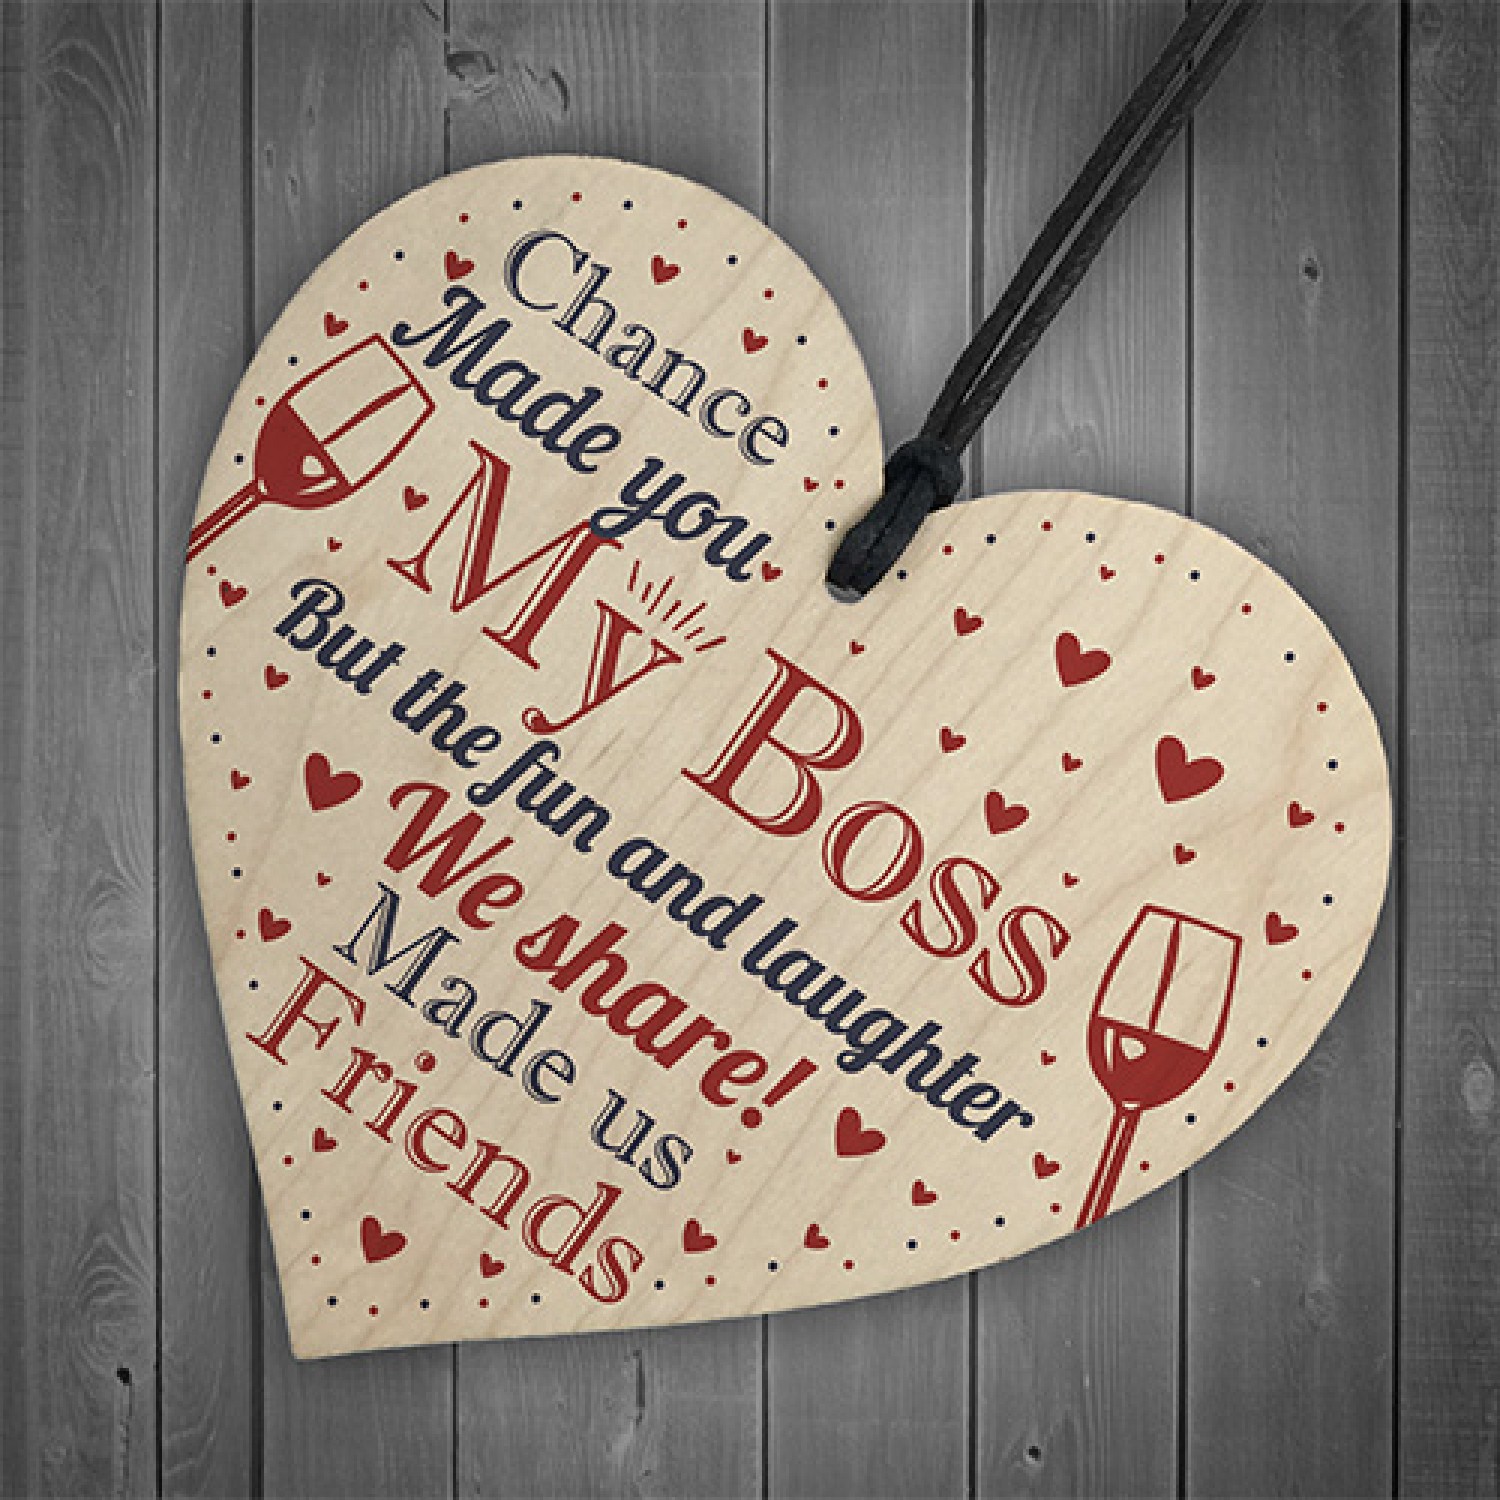 Boss Fun & Laughter Friends Manager Work Colleague Leaving Heart Gift LPA3-138 